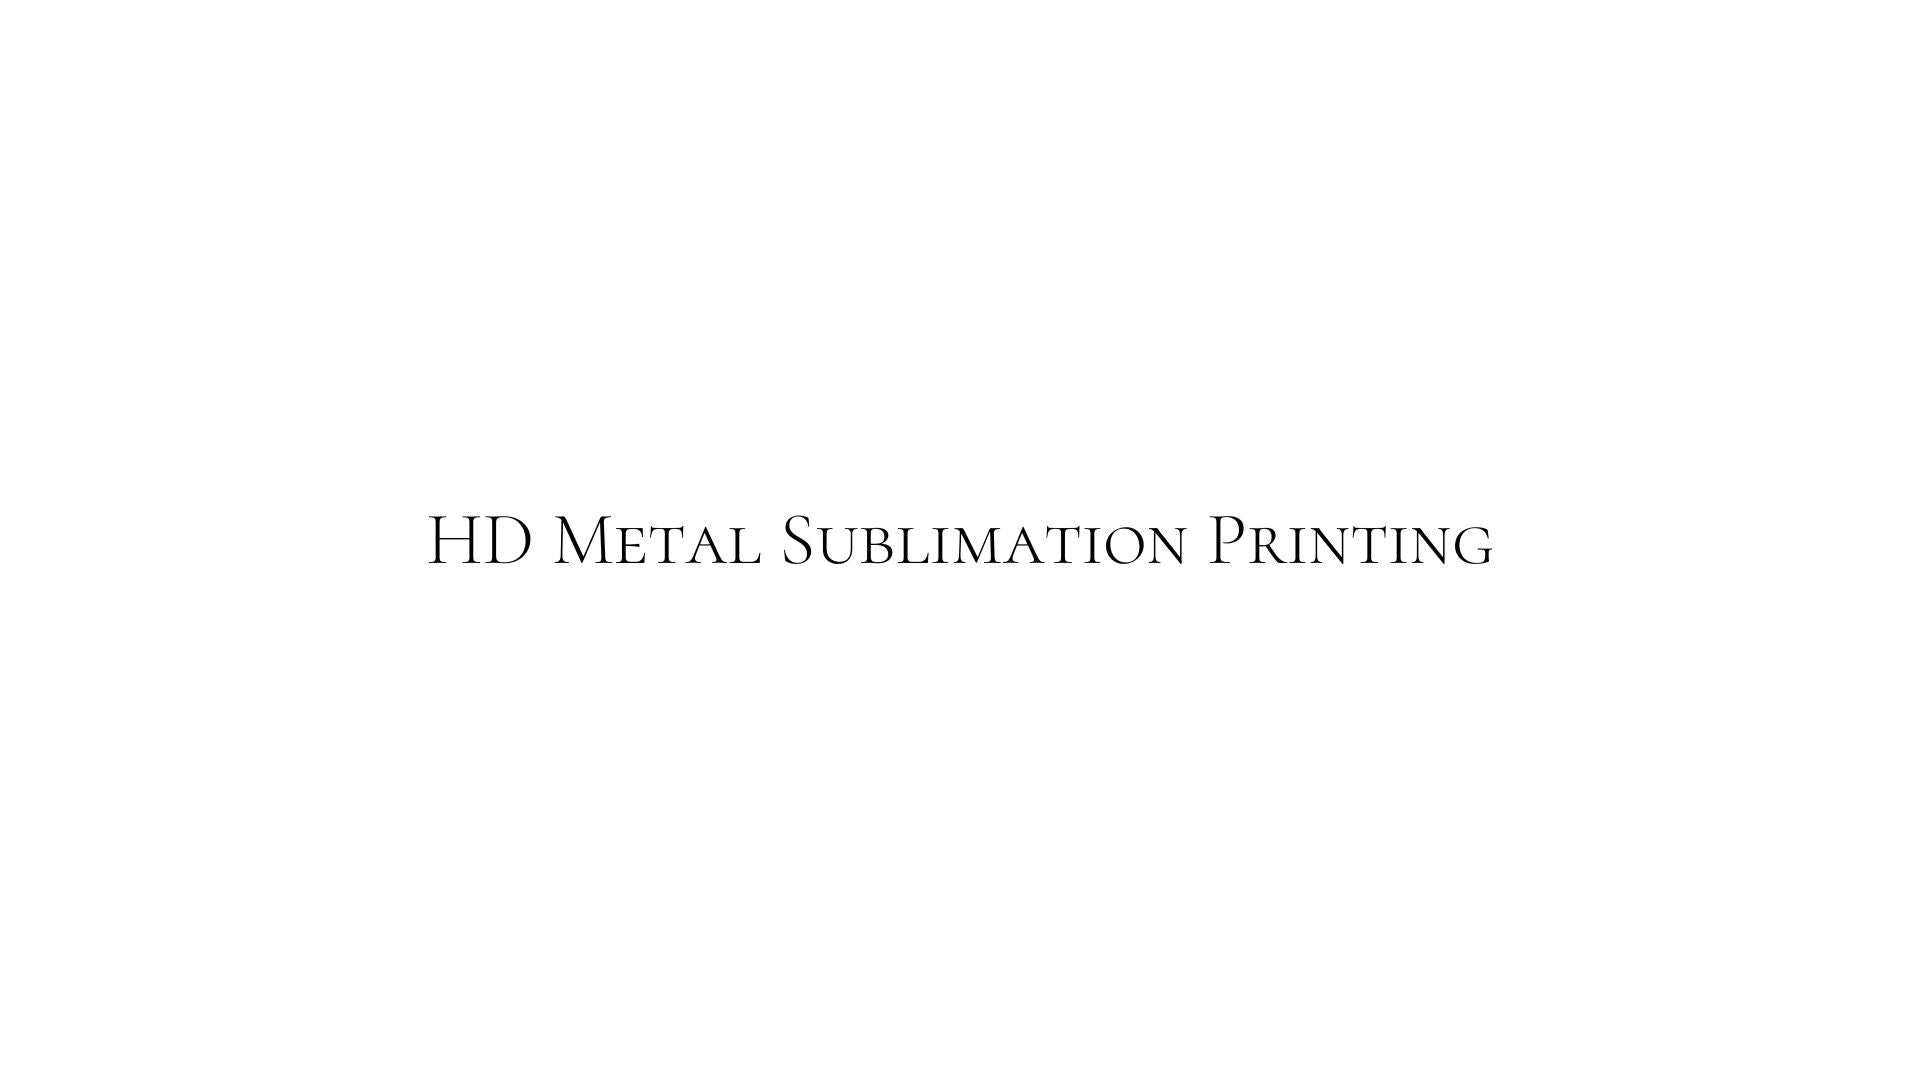 Load video: How are our HD Metal Sublimation Prints done.